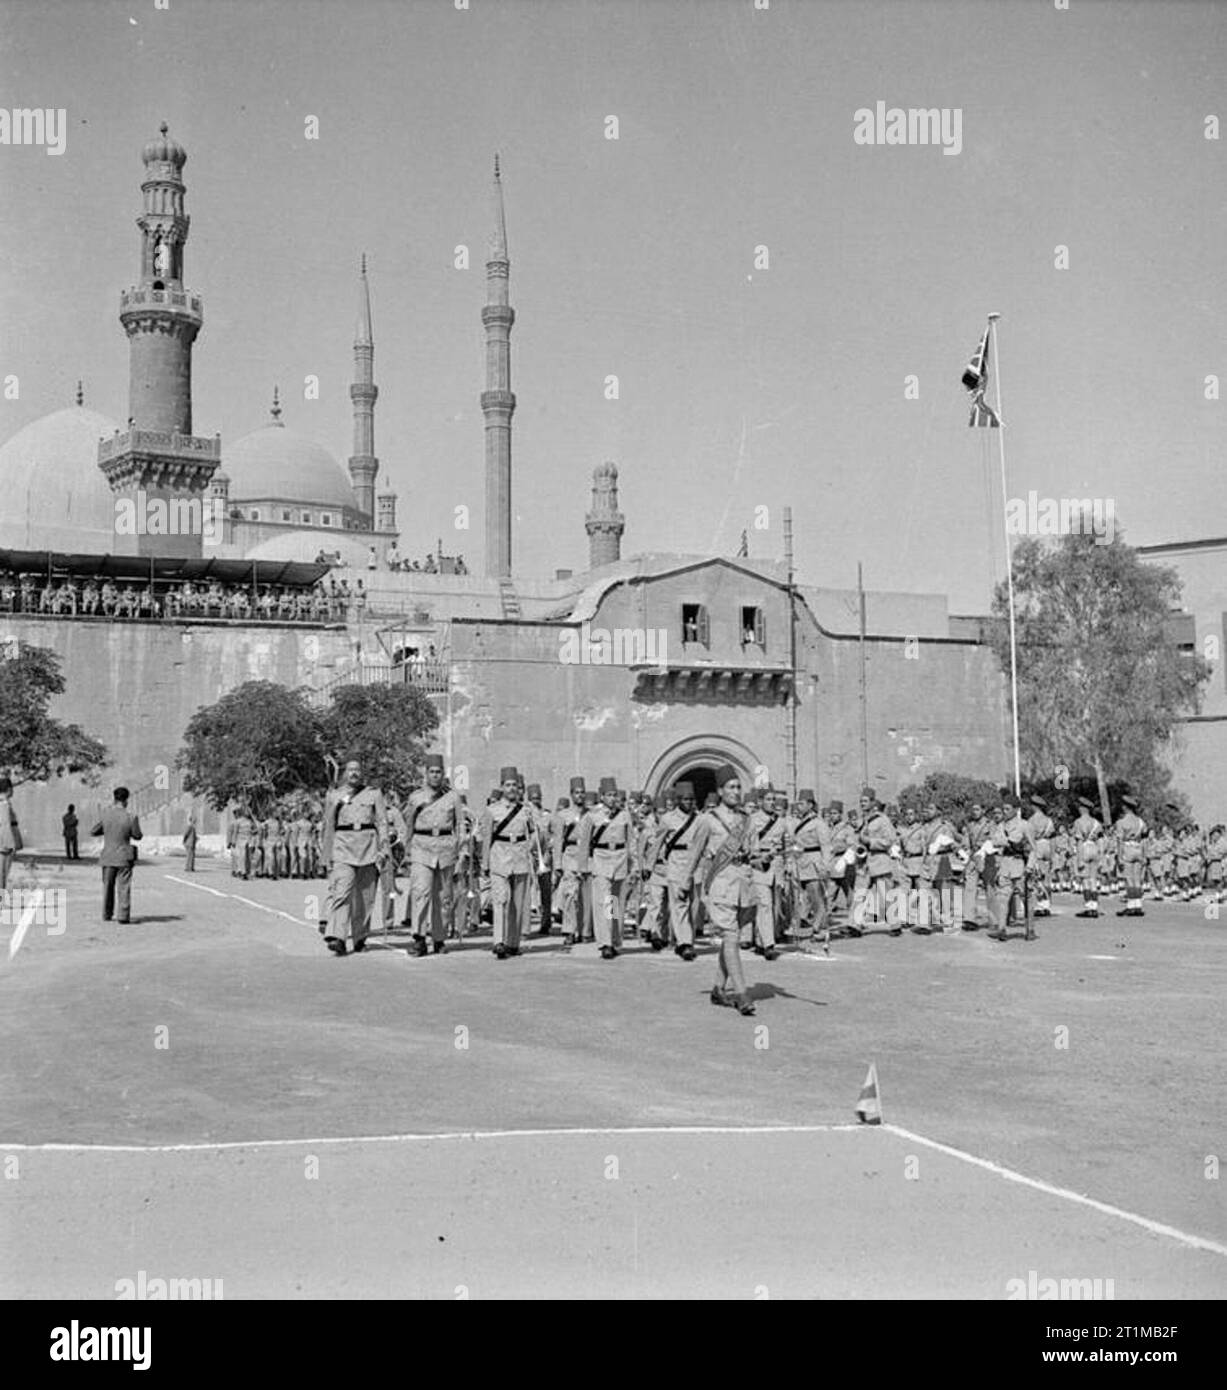 British Forces in the Middle East, 1945-1947 Under the shadow of the Blue Mosque, a contingent of the Egyptian Army marches into the courtyard of the citadel in Cairo during the ceremony marking the handing over of the fortress to local control. This was a first step towards the ending of British rule in Egypt. Stock Photo